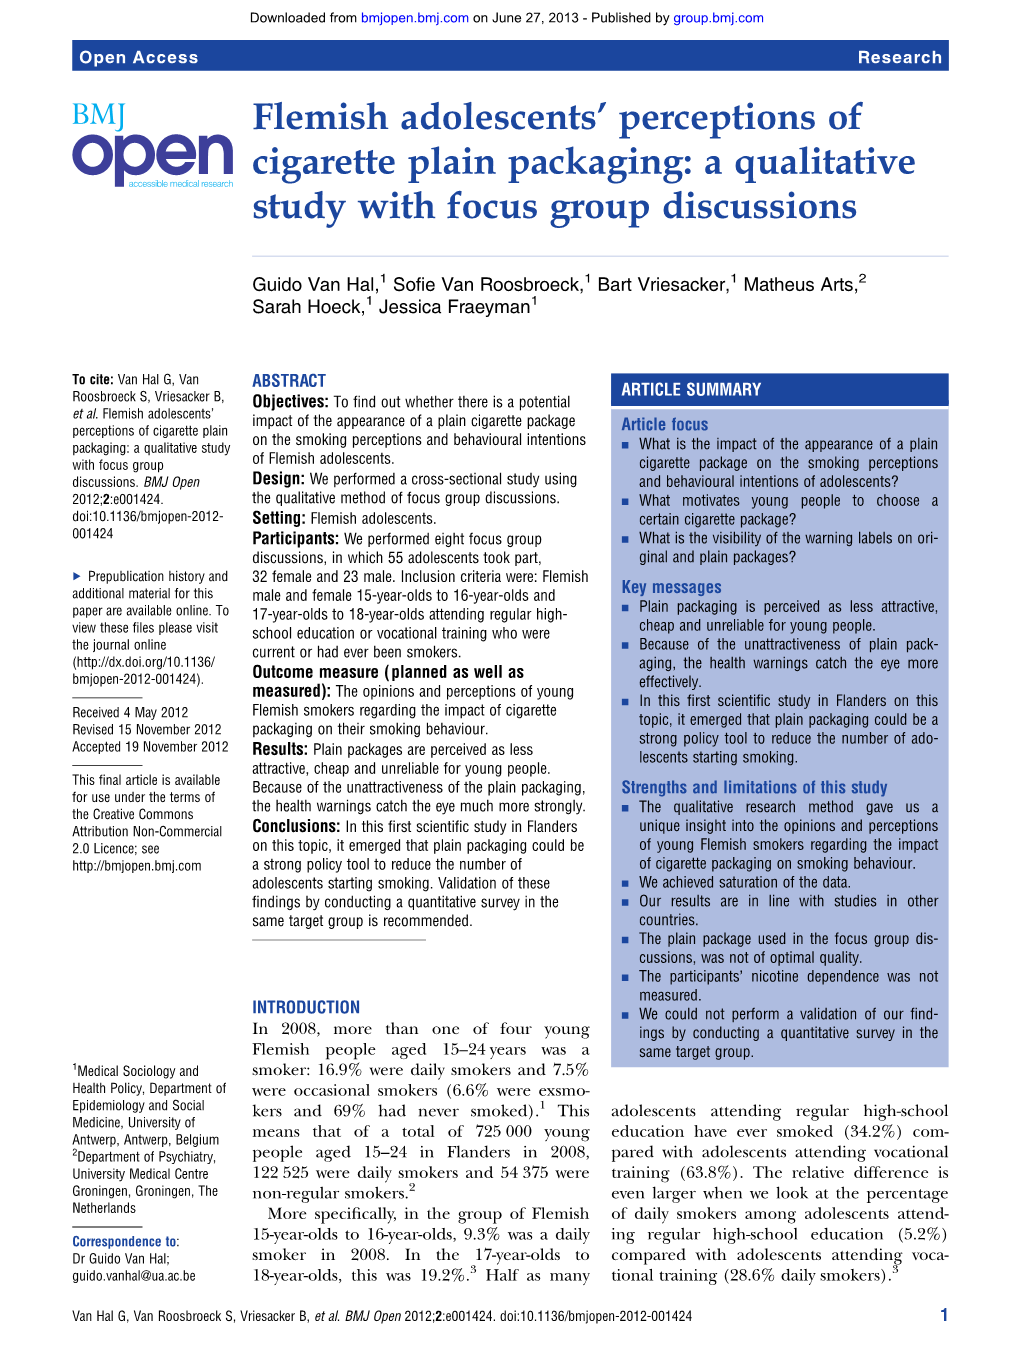 Flemish Adolescents' Perceptions of Cigarette Plain Packaging: a Qualitative Study with Focus Group Discussions